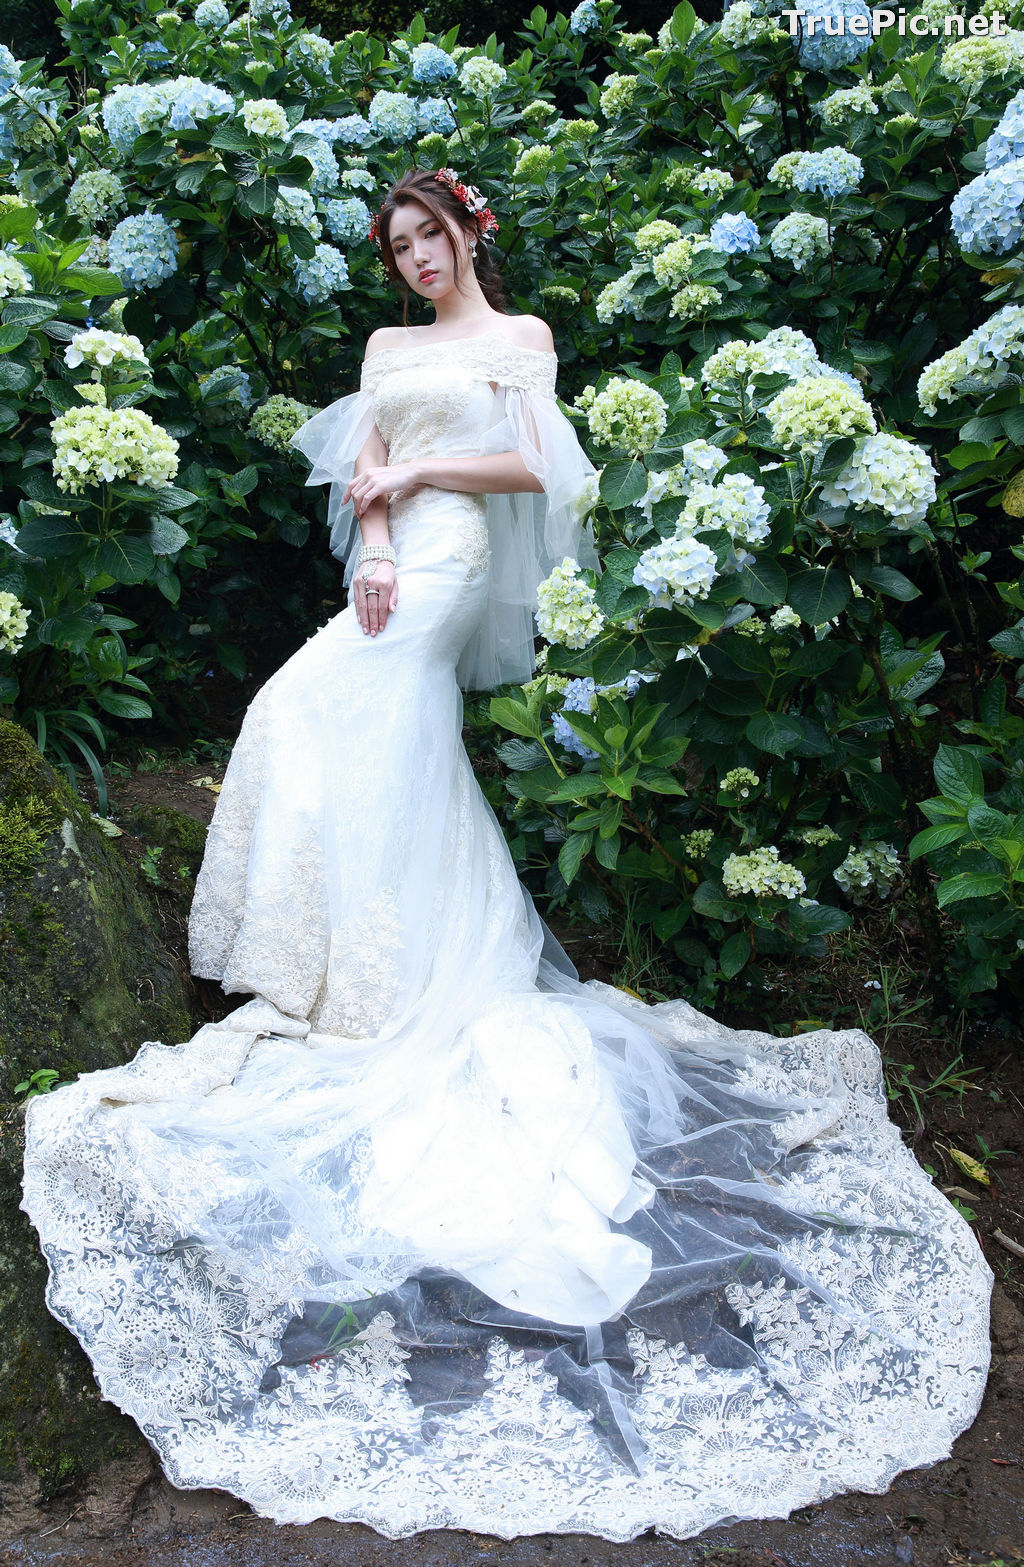 Image Taiwanese Model - 張倫甄 - Beautiful Bride and Hydrangea Flowers - TruePic.net - Picture-12